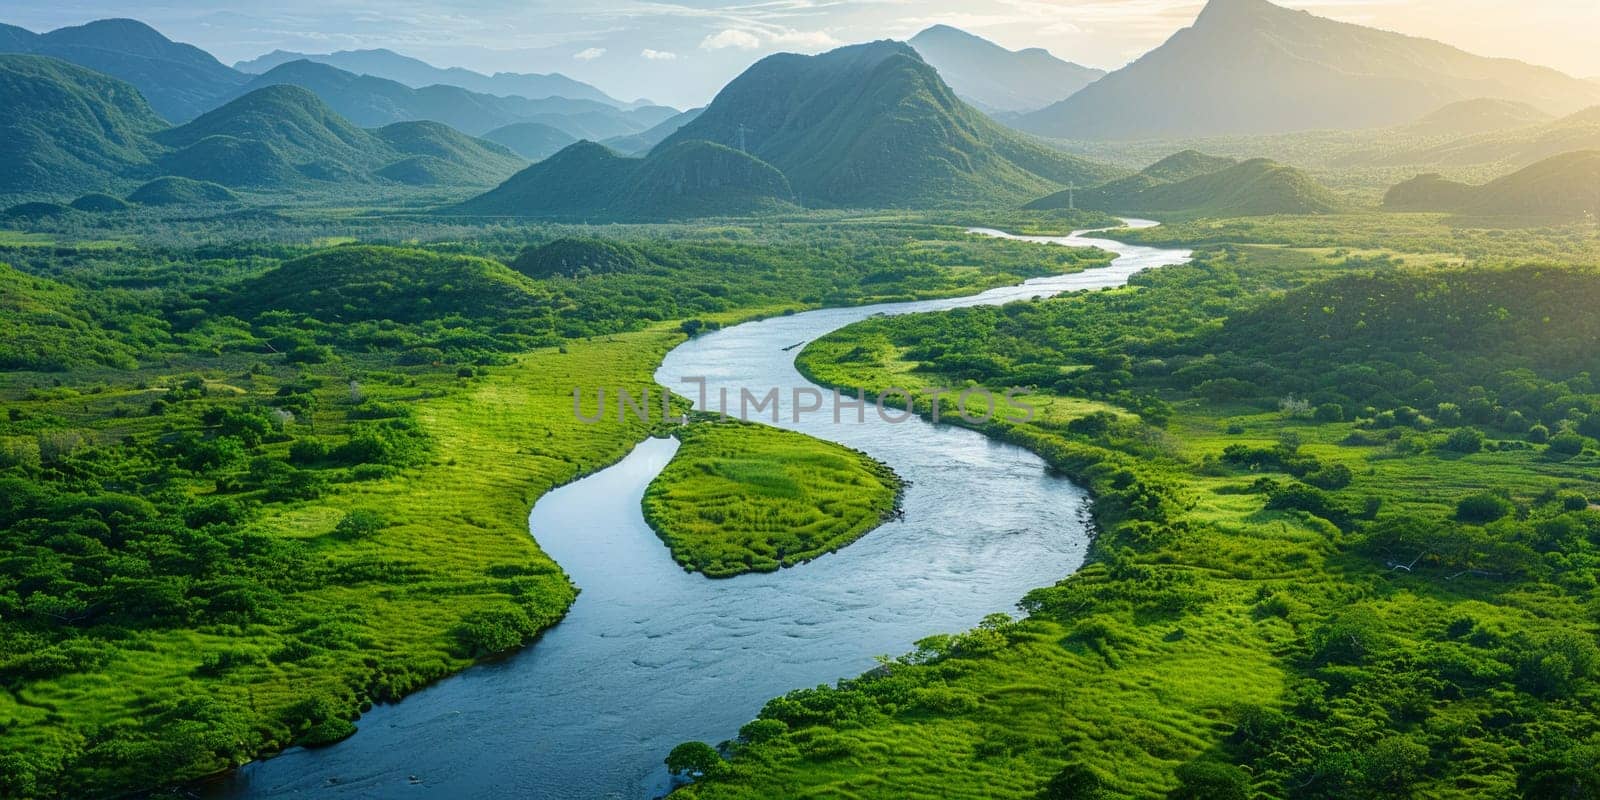 A meandering river winds its way through a vibrant green valley, surrounded by lush foliage and towering mountains in the distance.